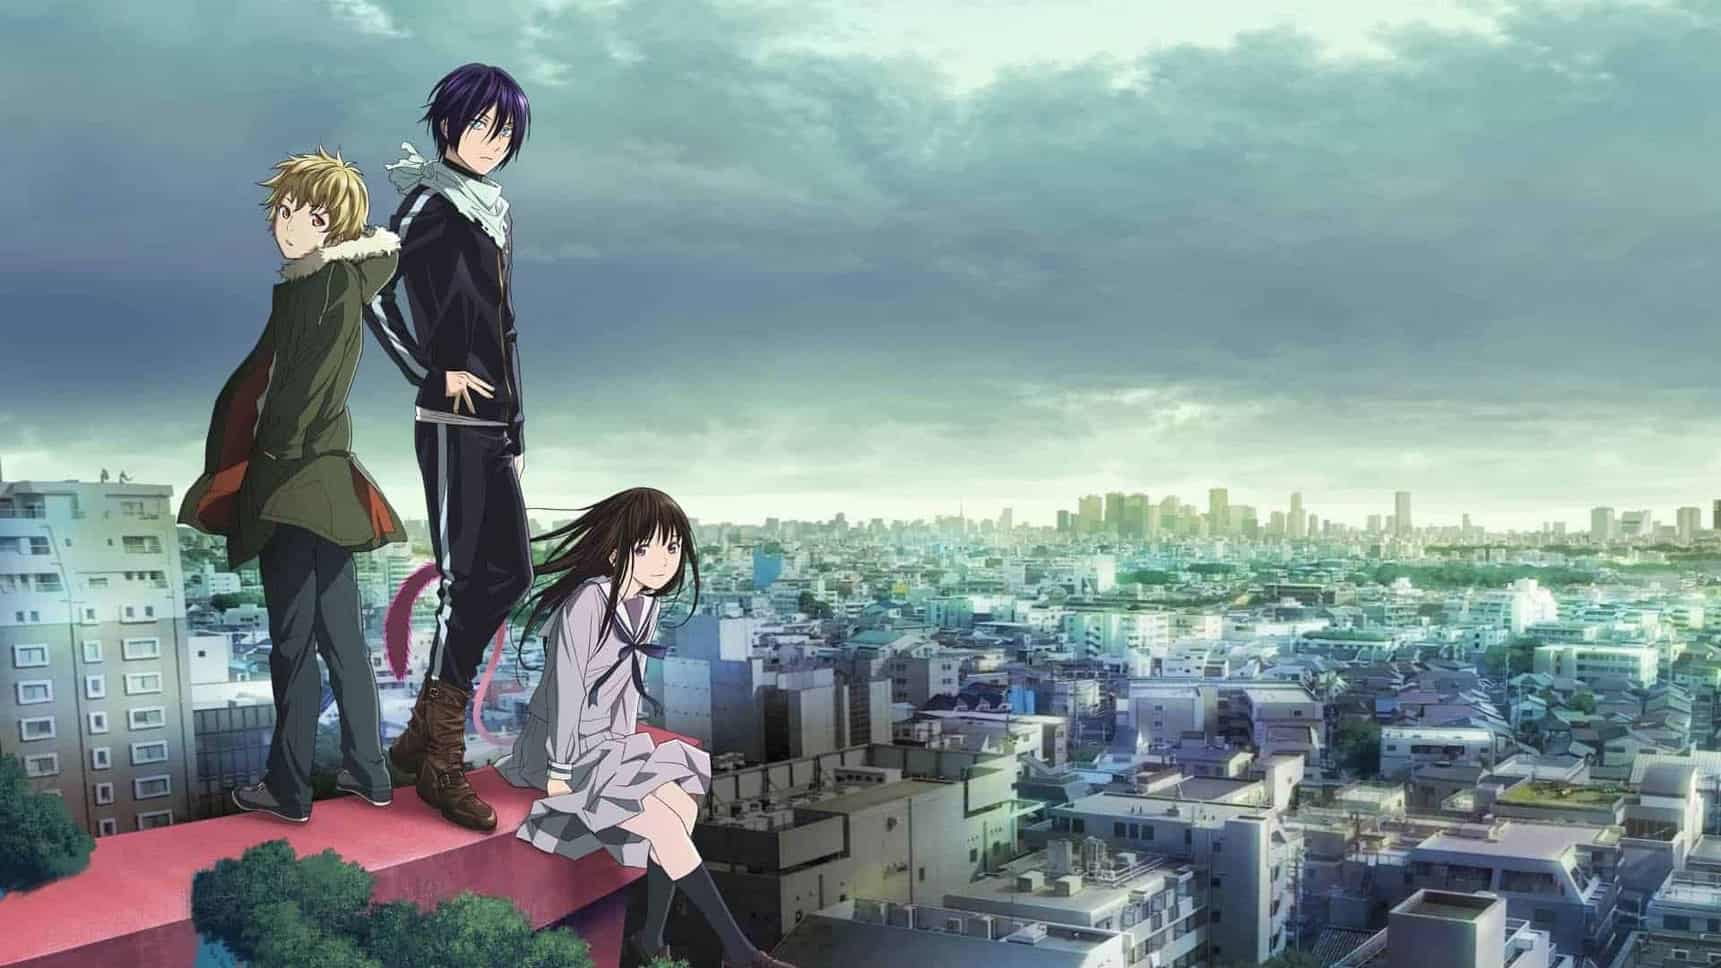 Animated Characters | Noragami season 3 release date